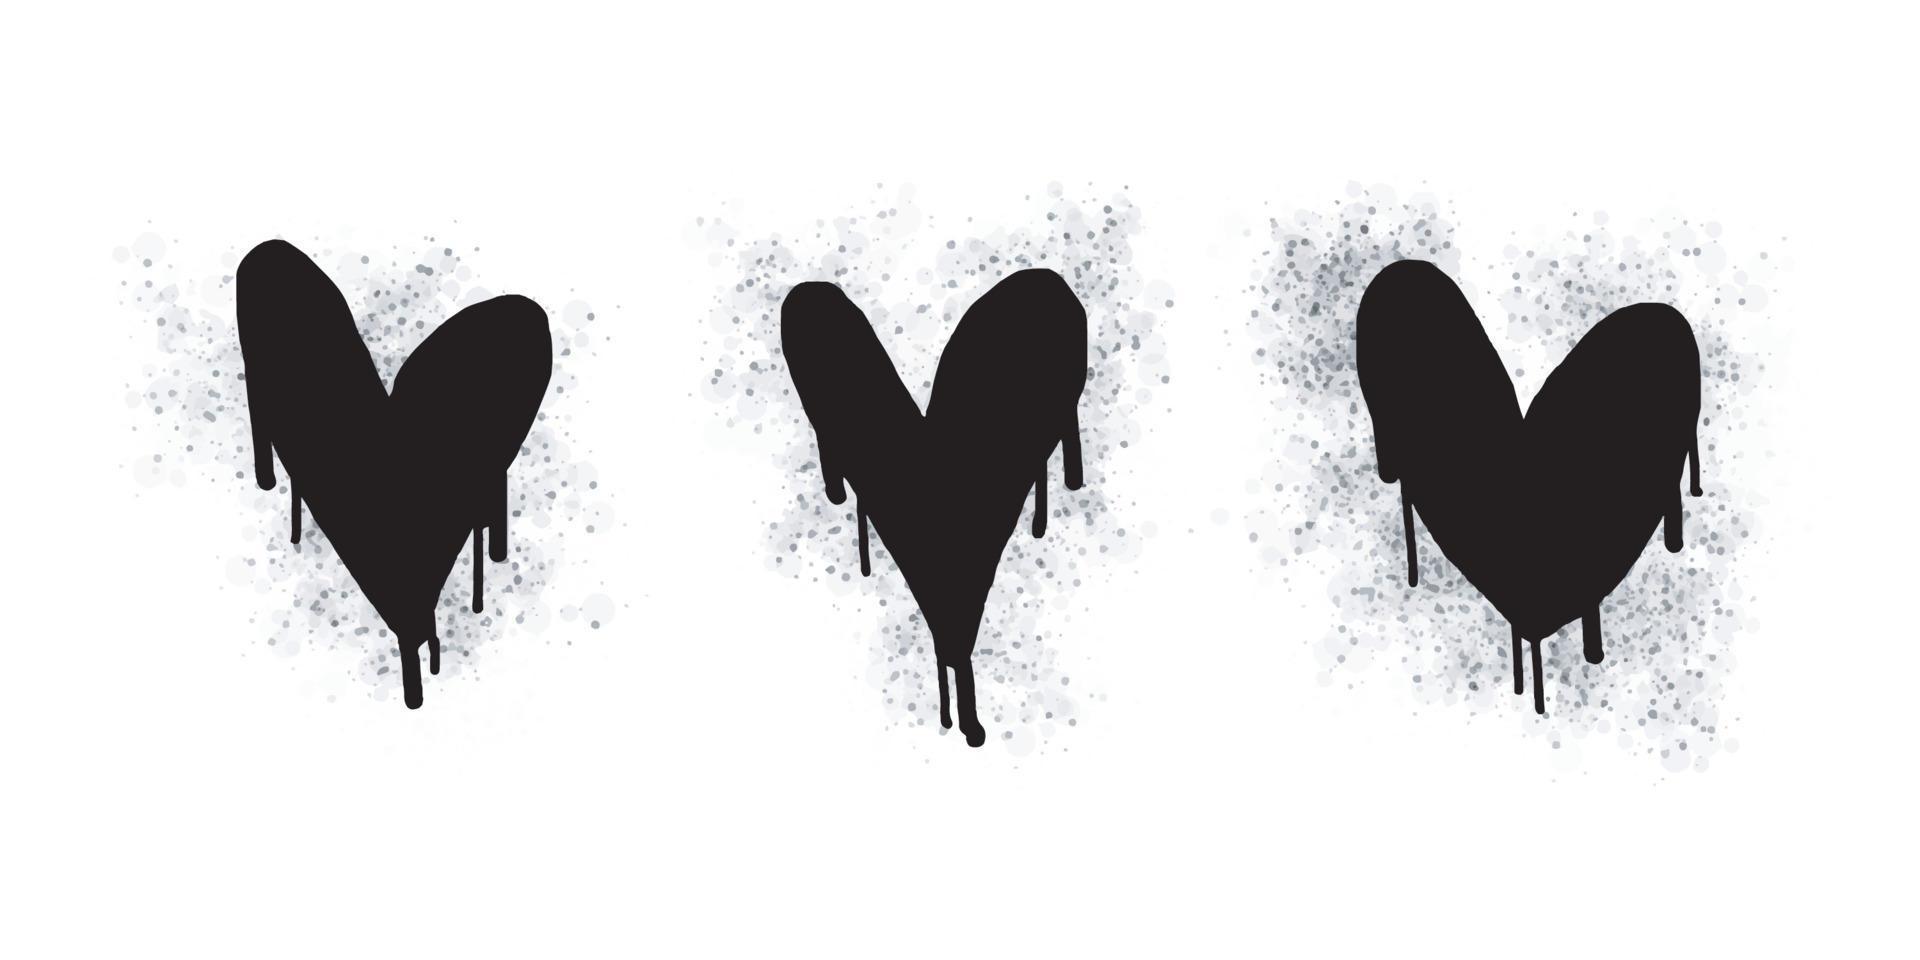 Spray graffiti heart sign painted in black on white. Love heart drop symbol. isolated on a white background. vector illustration